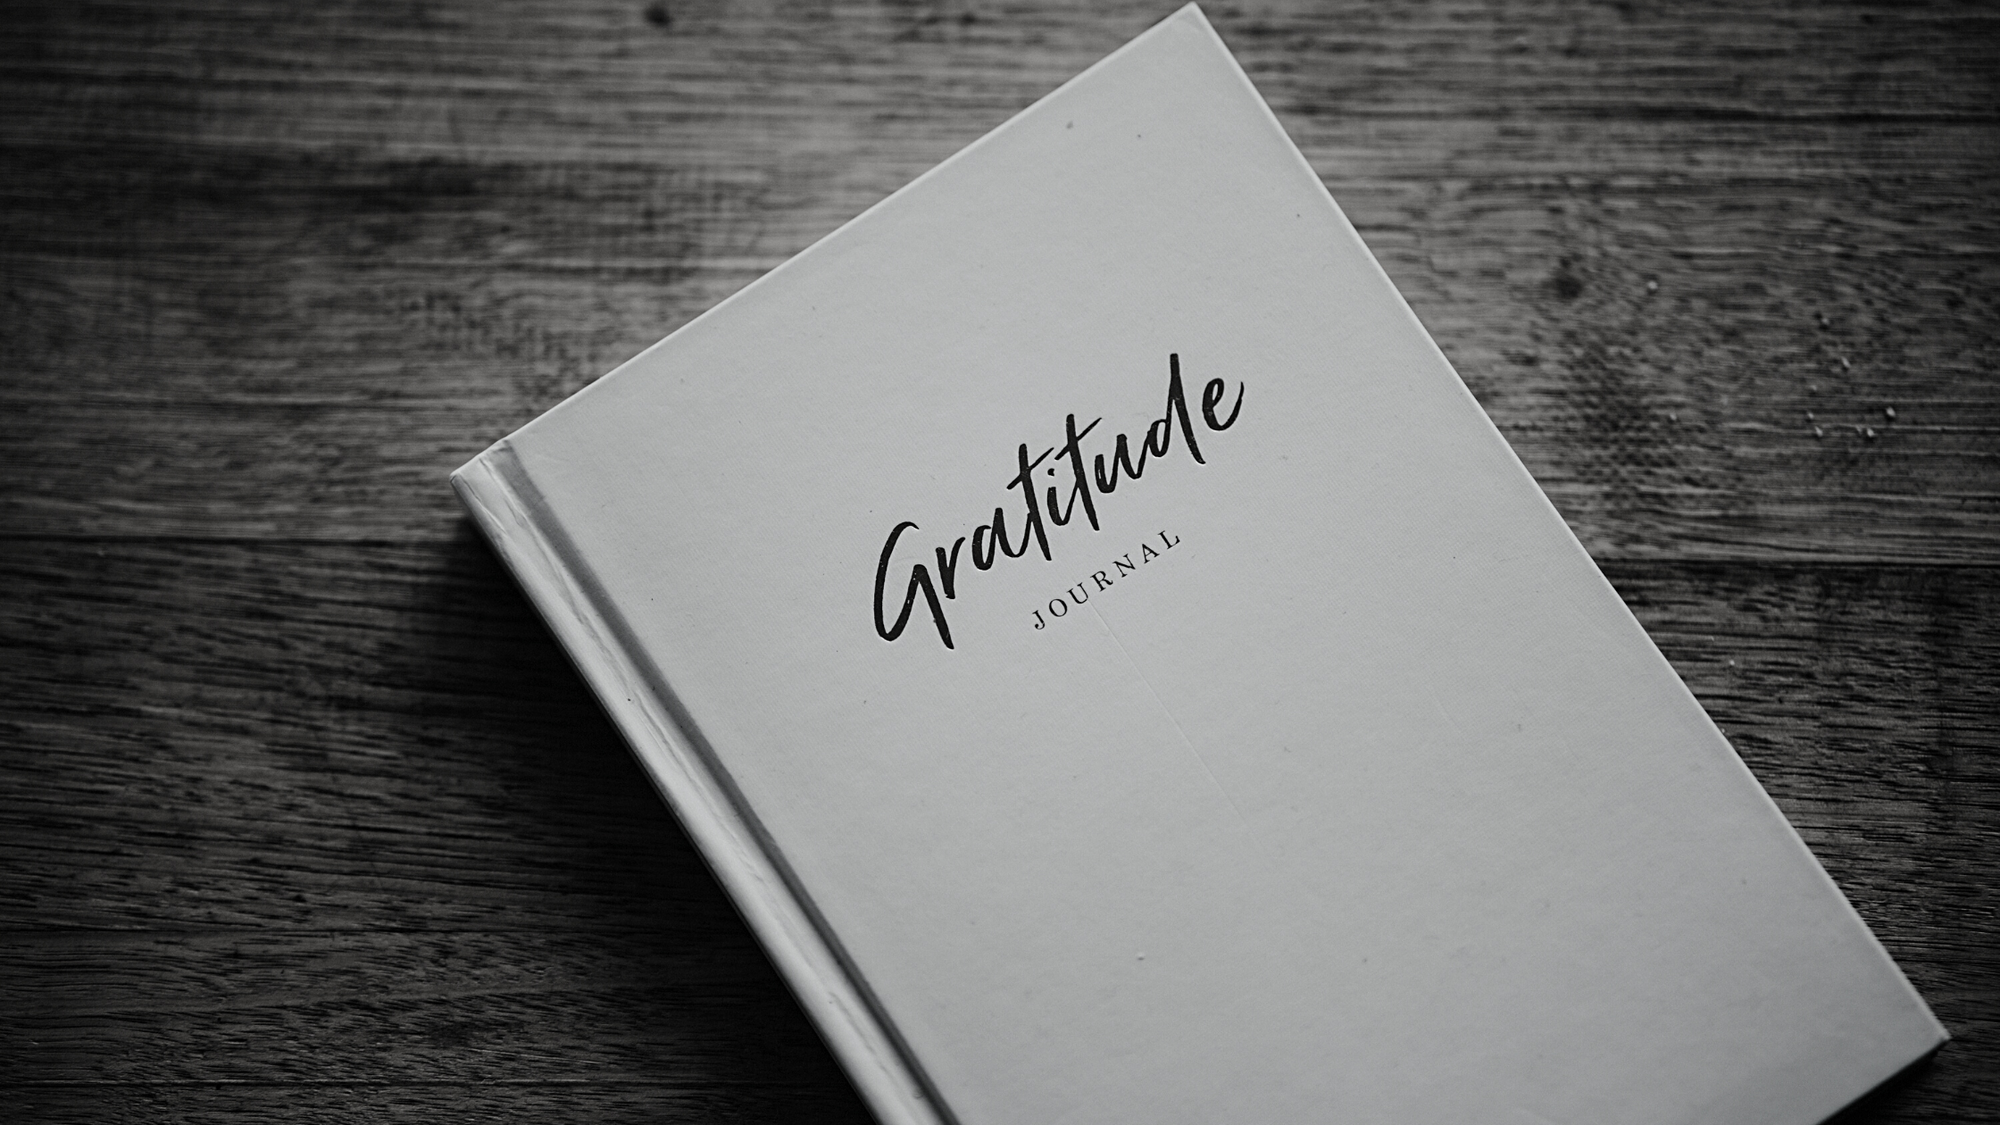 The 10 Ways Gratitude Leads You to Greatness